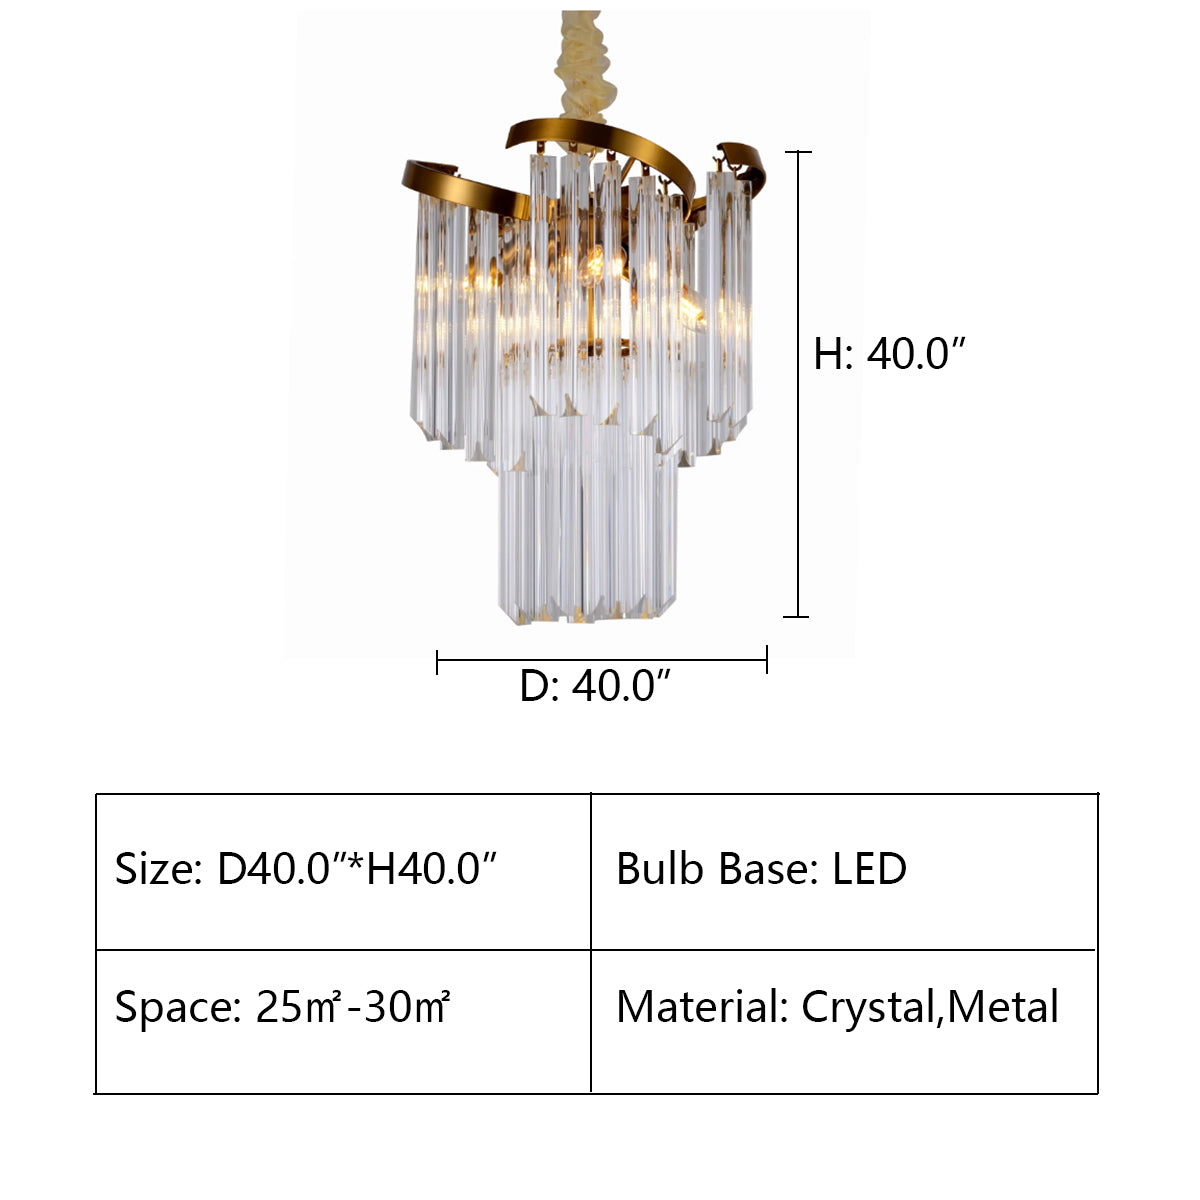 D40.0"*H40.0" TWIN PALMS ROUND CRYSTAL CHANDELIER,chandelier,chandeliers,pendant,ceiling,crystal,spiral,tiers,layers,multi-tier,multi-layer,living room,dining room,bedroom